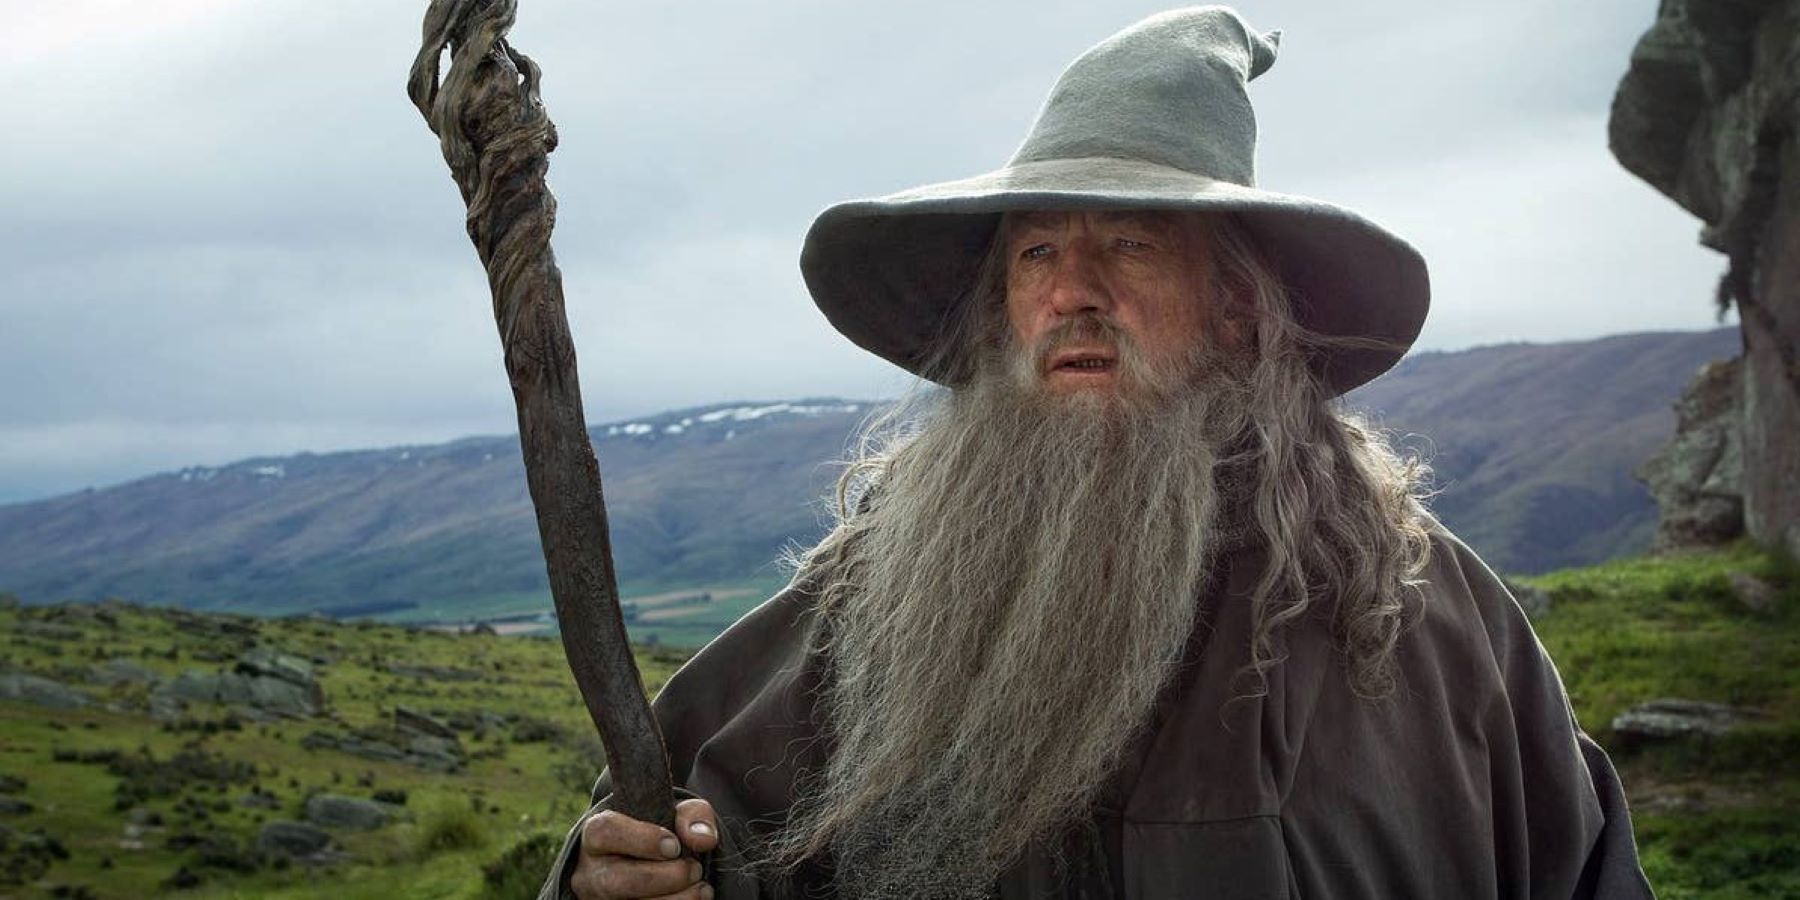 Gandalf And More Shown Off In New Lord Of The Rings: Gollum Trailer